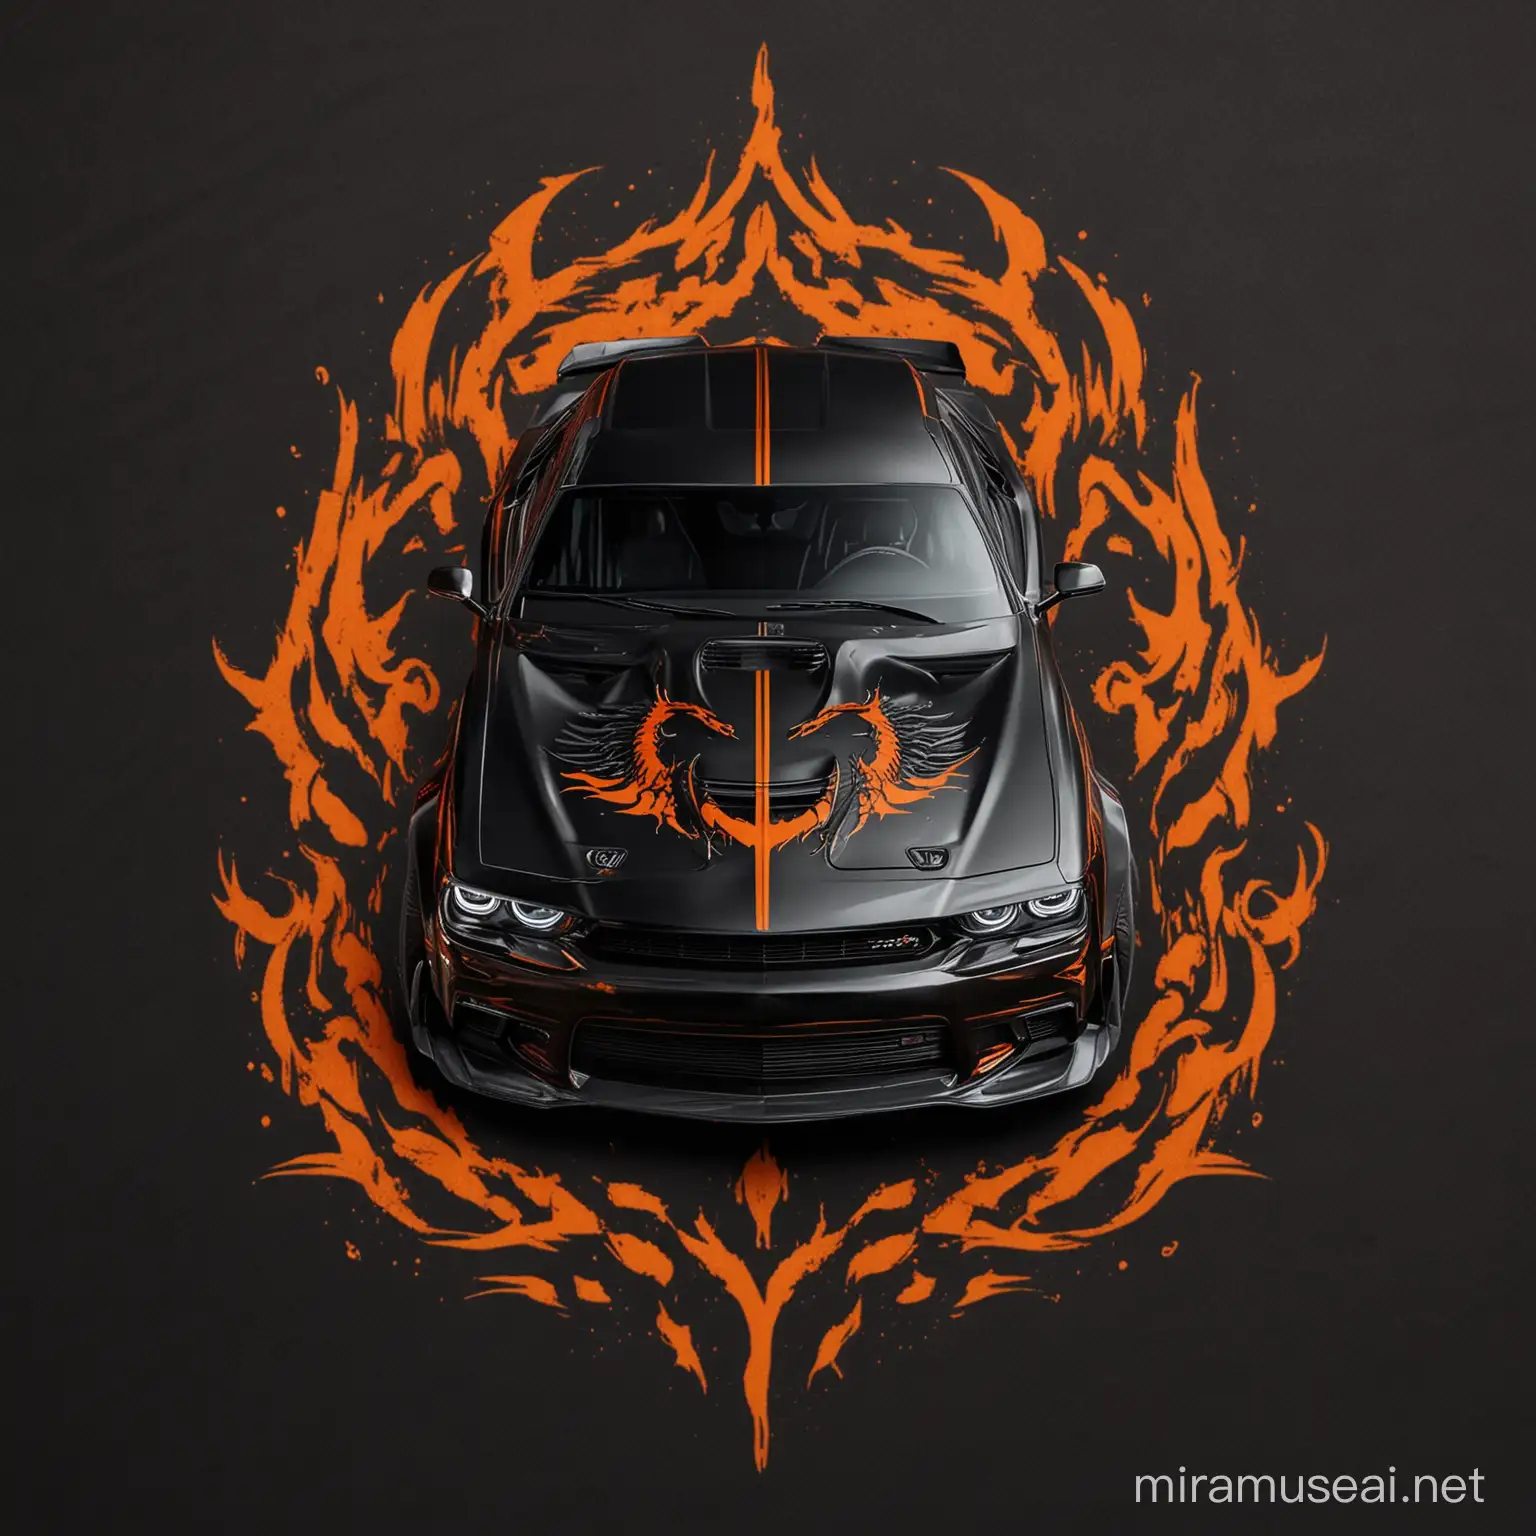 
Title: "Dragon's Fury: Custom Black and Orange Dodge Challenger SRT Demon 170"

Description:
Imagine a mesmerizing design featuring a custom-built Dodge Challenger SRT Demon 170, adorned in a striking black and orange color scheme that exudes power and ferocity. Against the backdrop, an intricate outline of a dragon's face emerges, its piercing gaze and menacing silhouette adding an element of mystique and intrigue to the composition. With meticulous attention to detail and a passion for automotive excellence, this design captures the essence of speed, adrenaline, and untamed energy. Perfect for enthusiasts who appreciate bold and dynamic style, this t-shirt design is sure to turn heads and ignite the imagination.